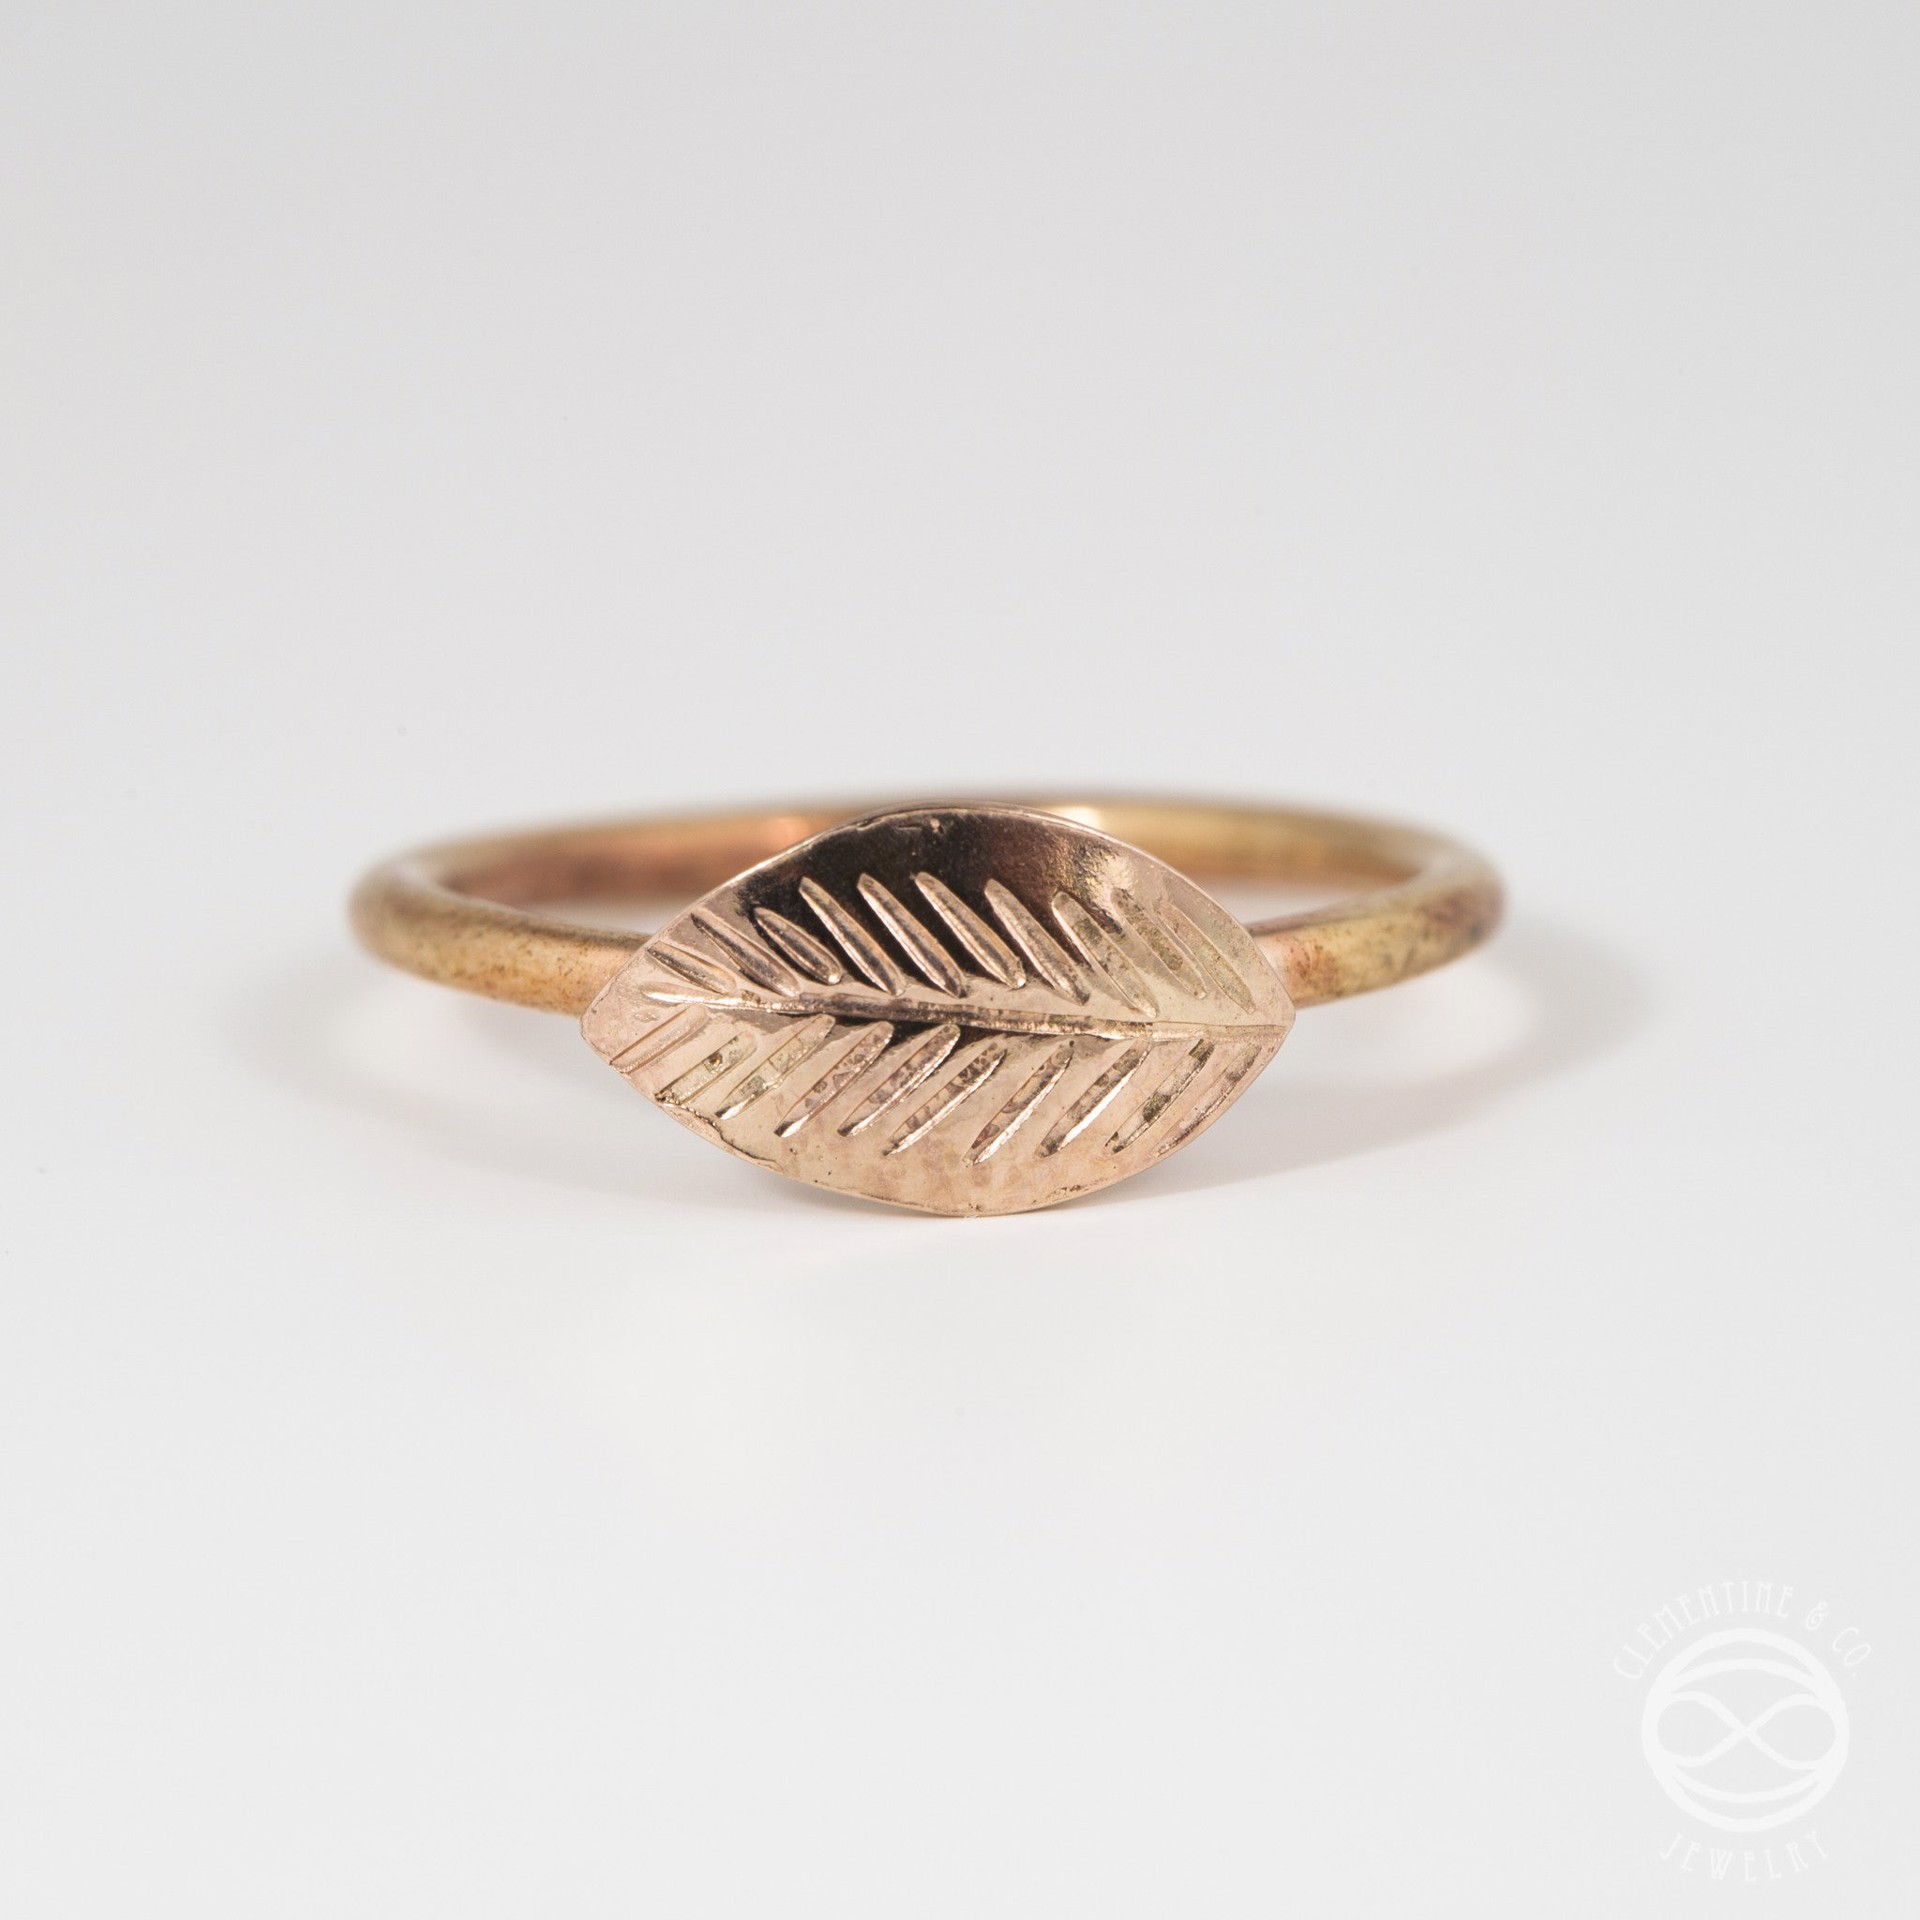 Leaf Ring - 4 / 14k Gold Fill by Clementine & Co. Jewelry